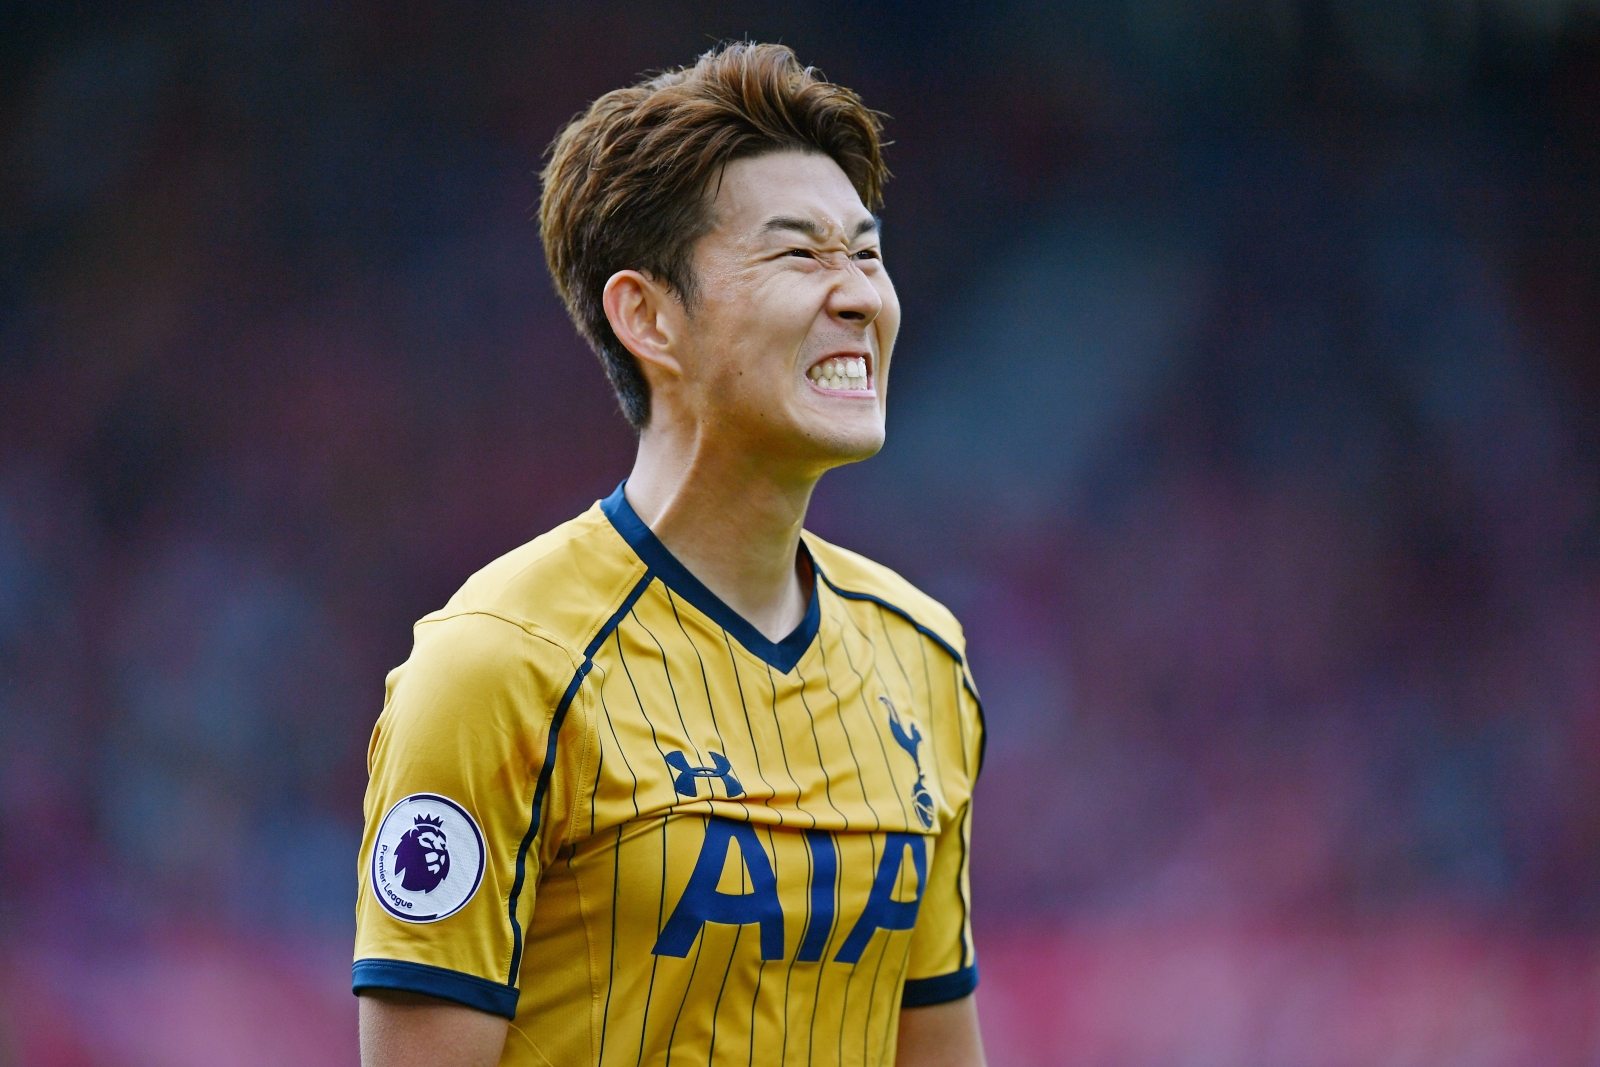 Tottenham transfer news: Son Heung-min thrilled at being retained by Mauricio Pochettino1600 x 1067